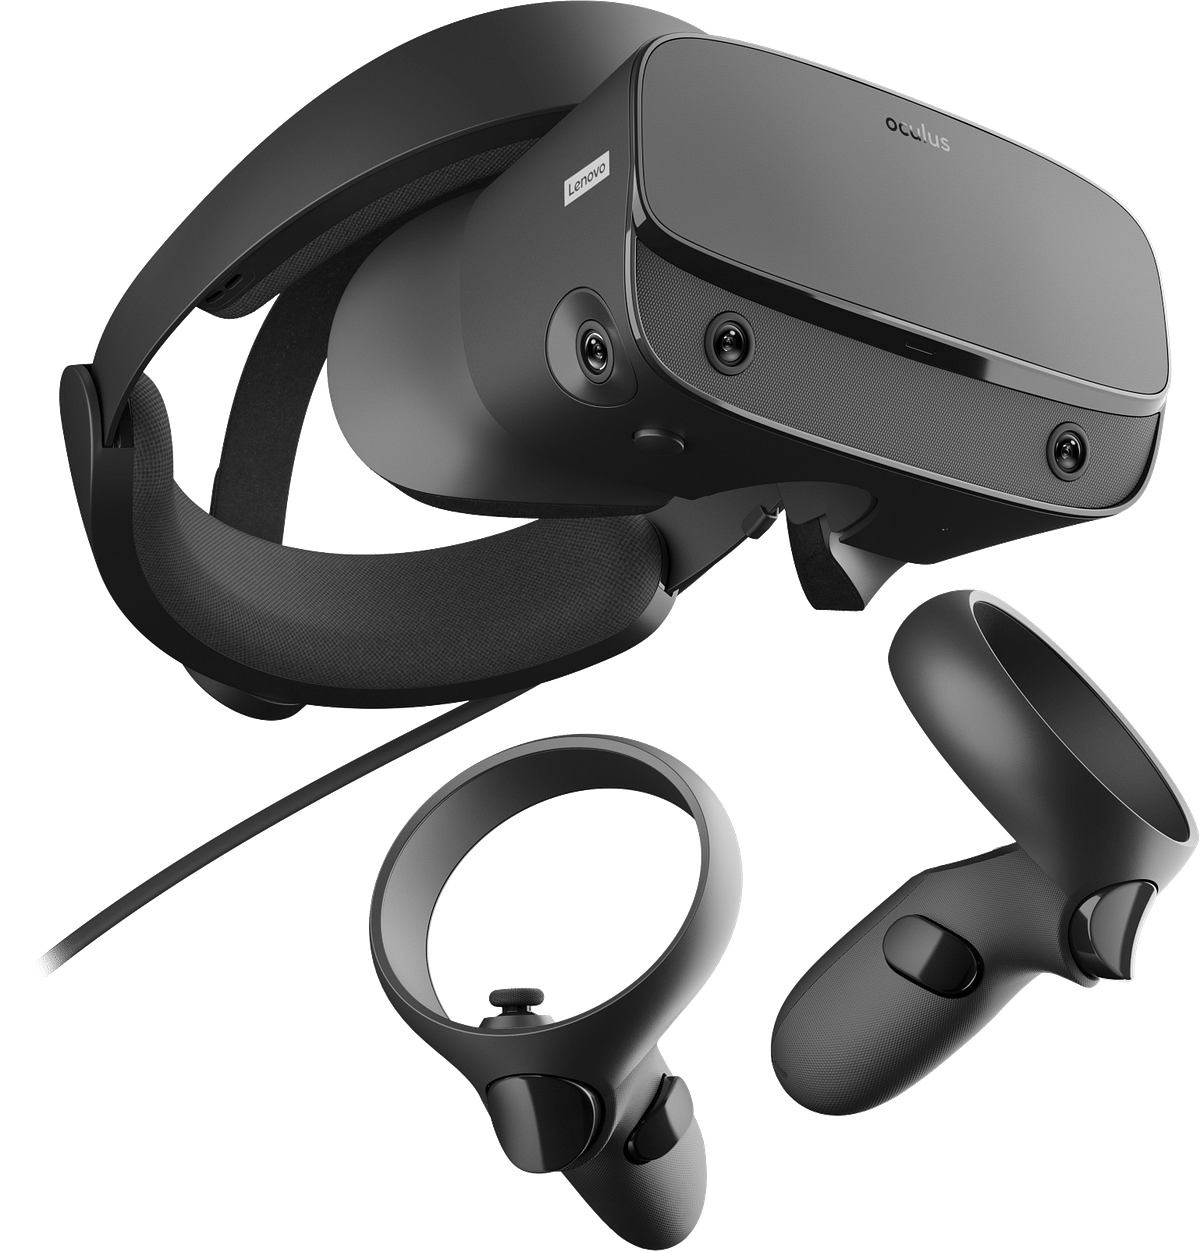 The Oculus Rift S VR gaming headset still needs a PC to function. 